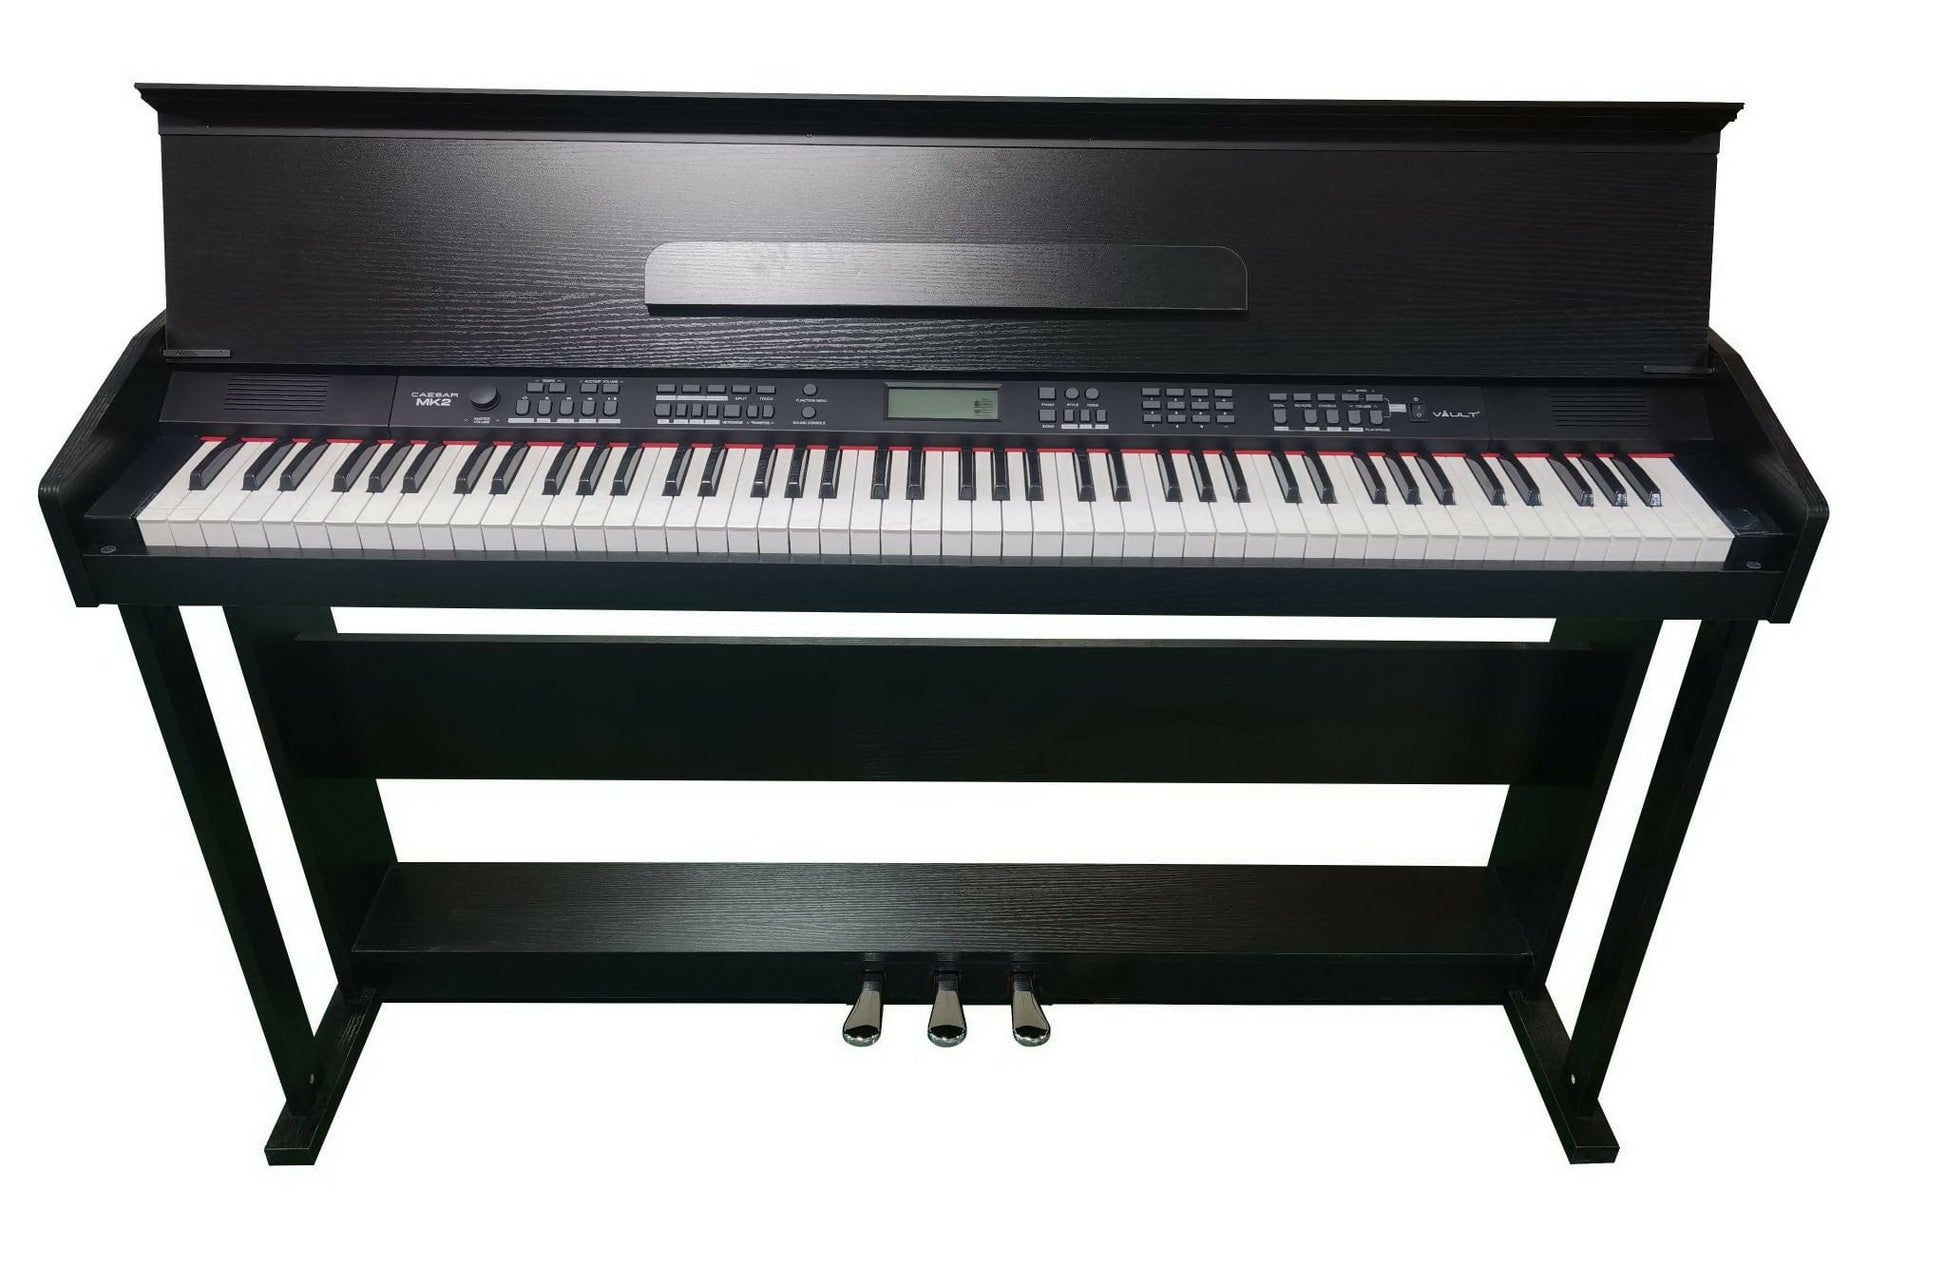 Provideolb Portable & Arranger Keyboards ARA Piano 88 Key With Touch Response - TR89BL